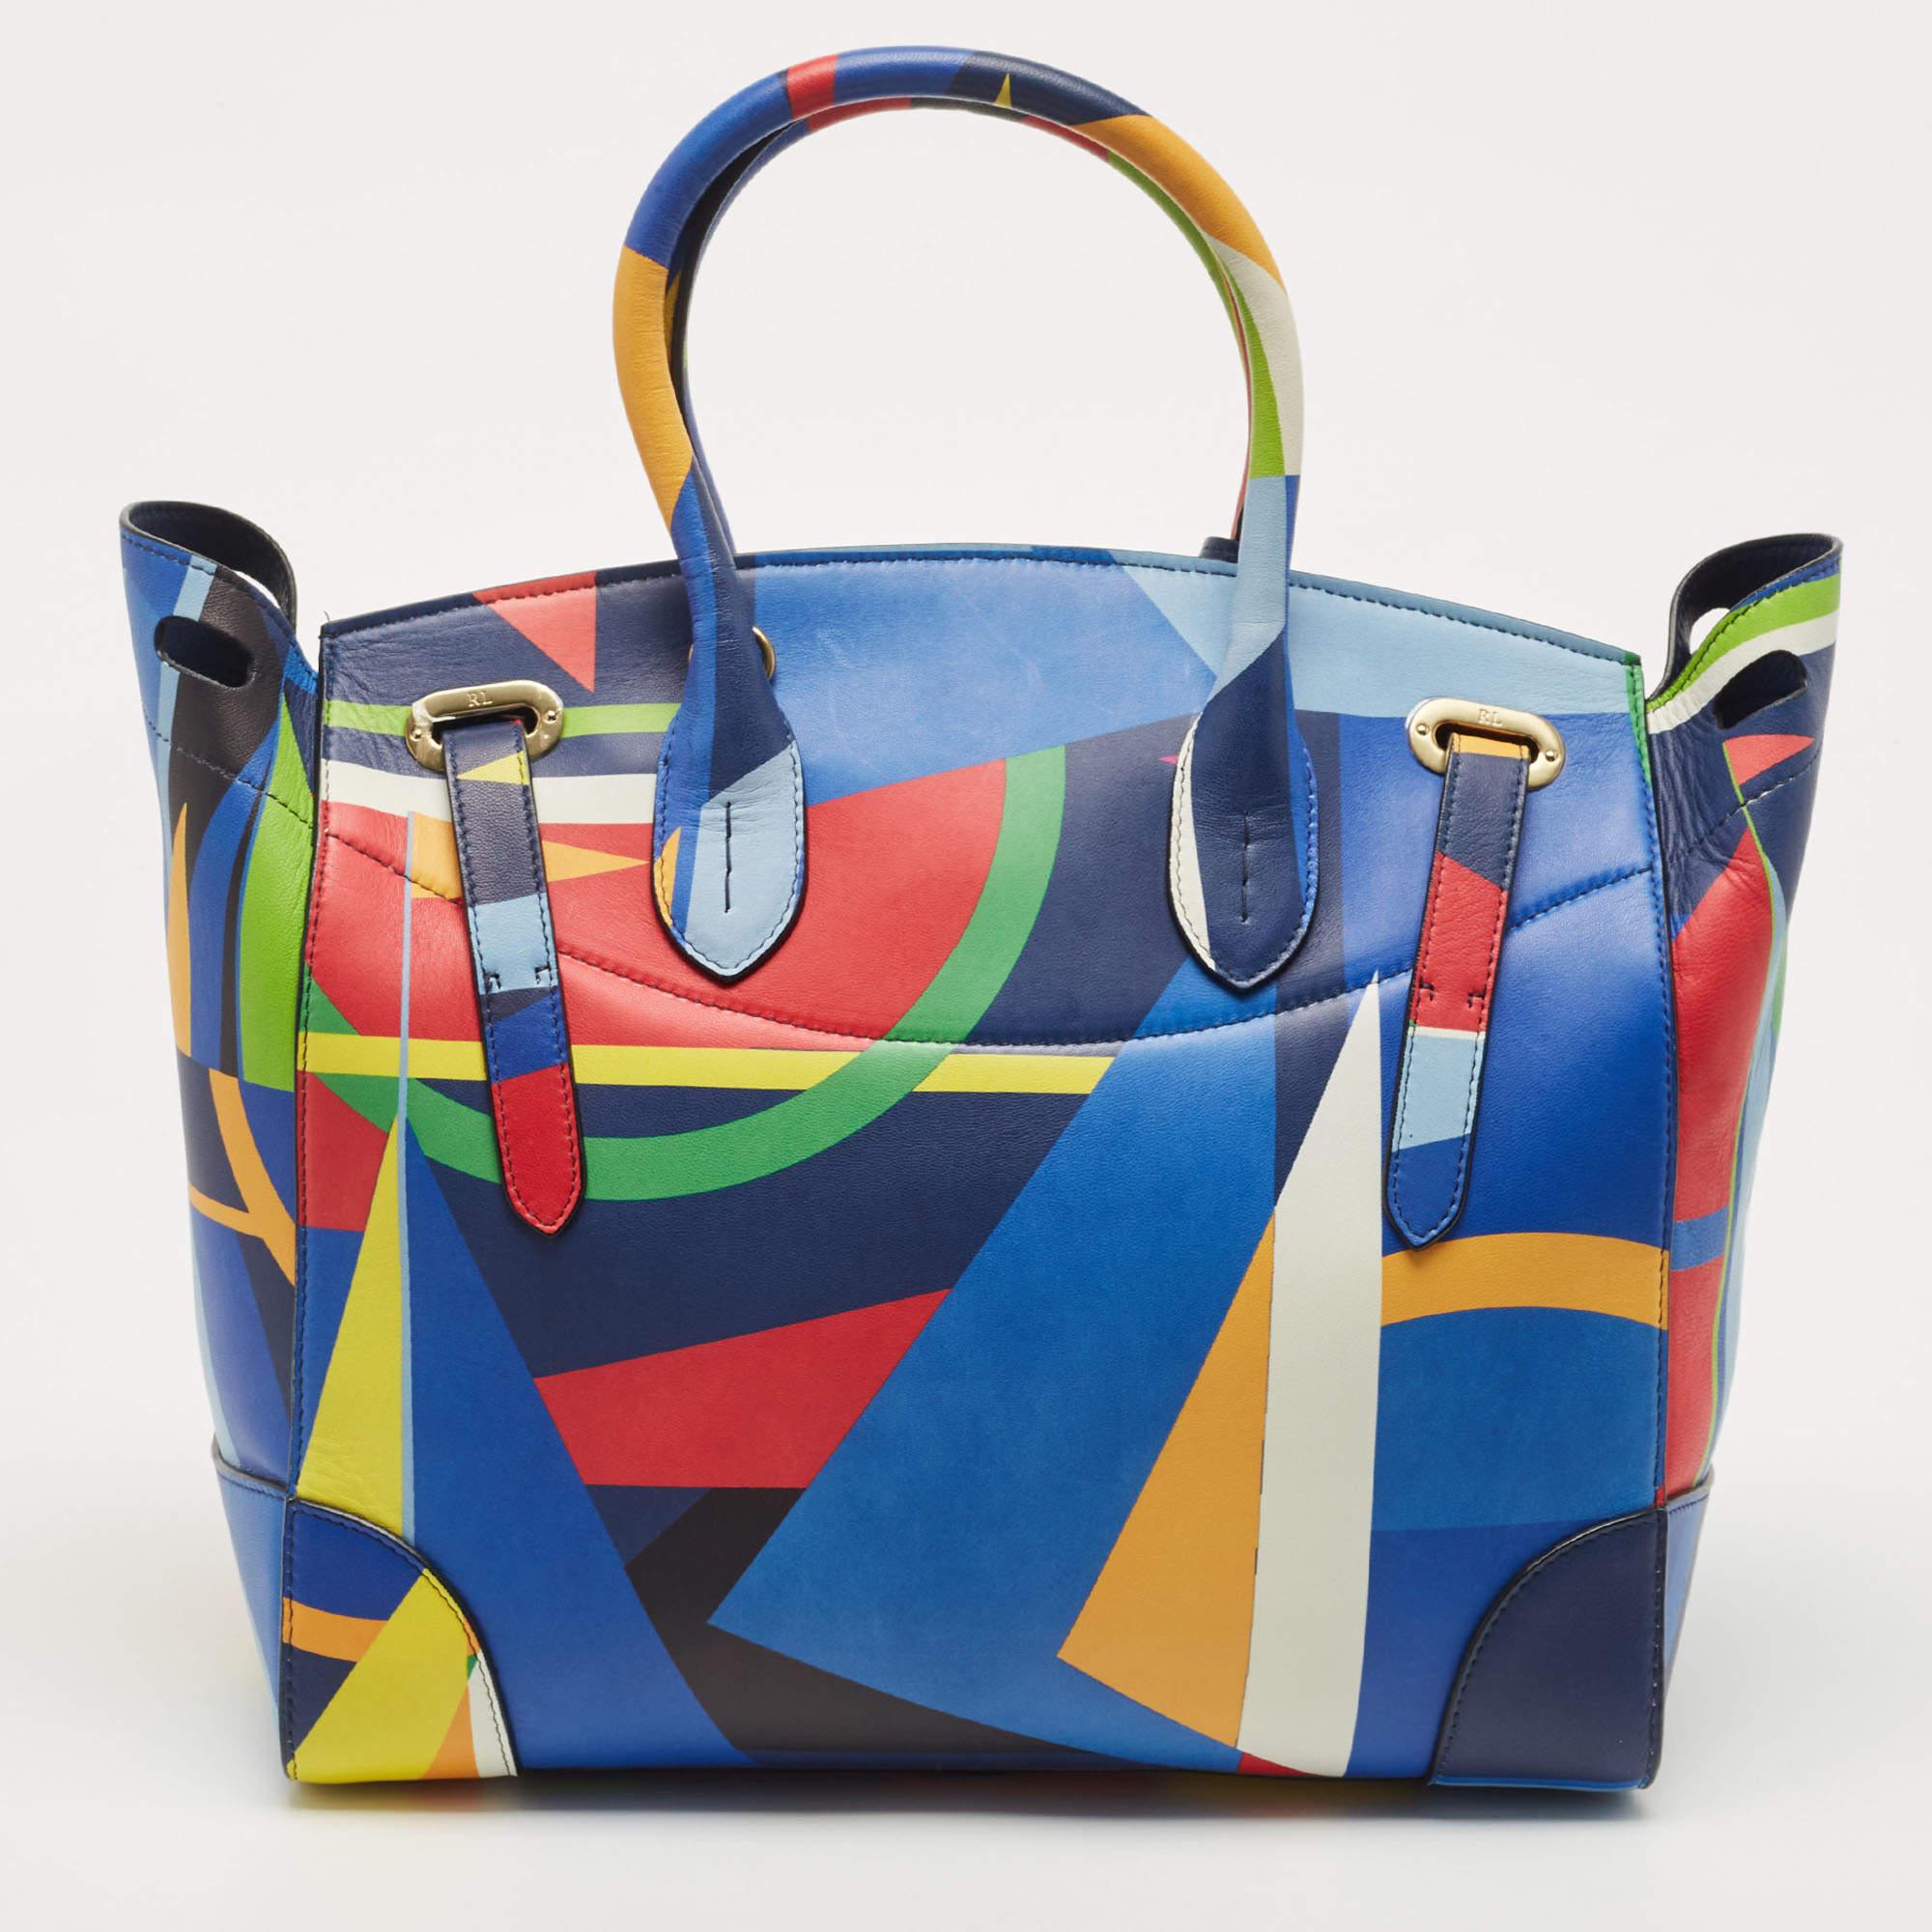 The architectural shape of this tote makes it distinct and fashionable. Made from premium materials, it can be carried around conveniently and it is equipped with a perfectly-sized interior.

Includes: Original Dustbag, Detachable strap,